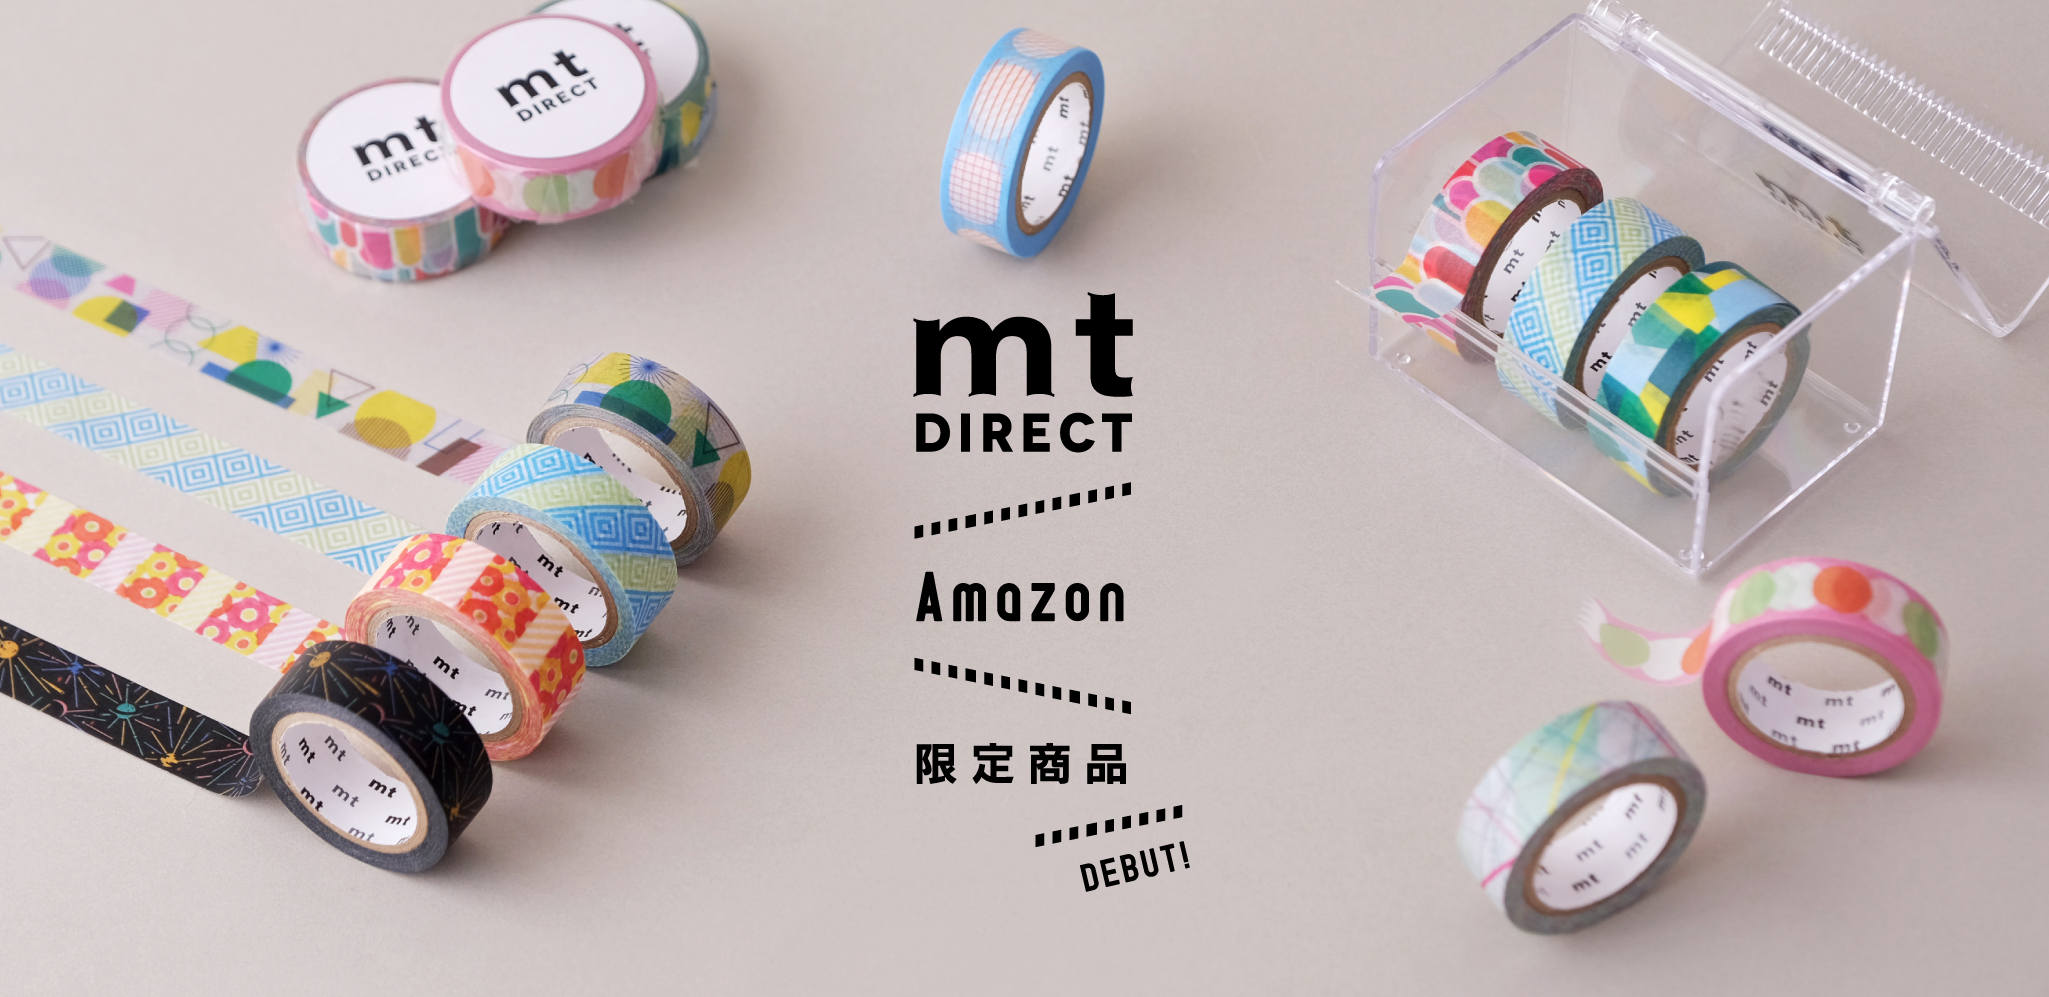 mt DIRECT amazon 限定商品 DEBUT!